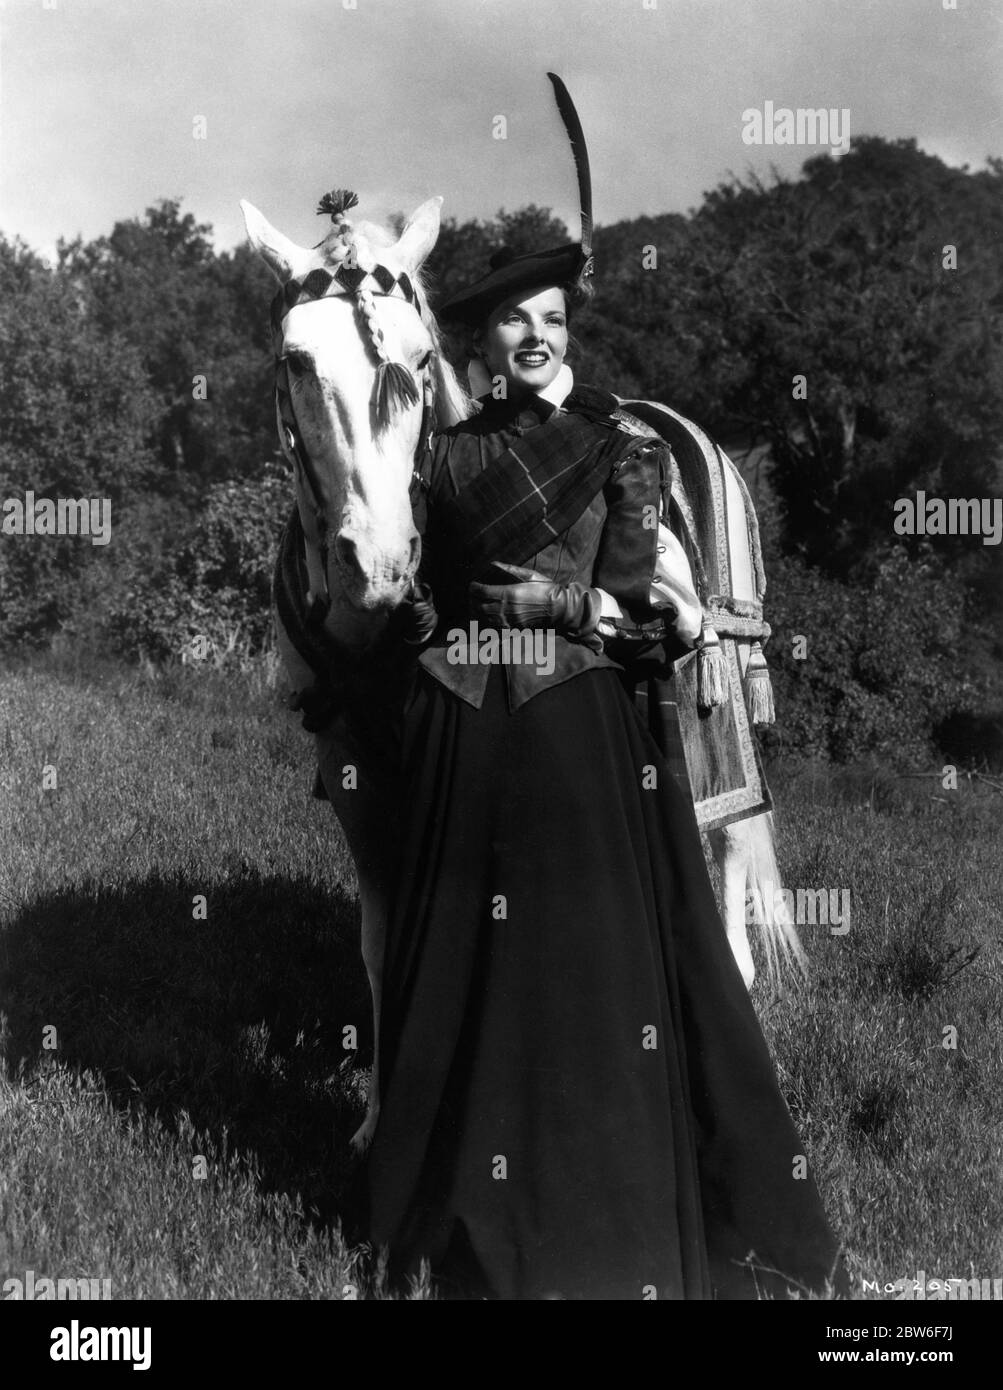 KATHERINE HEPBURN as Mary Queen of Scots in MARY OF SCOTLAND 1936 ...